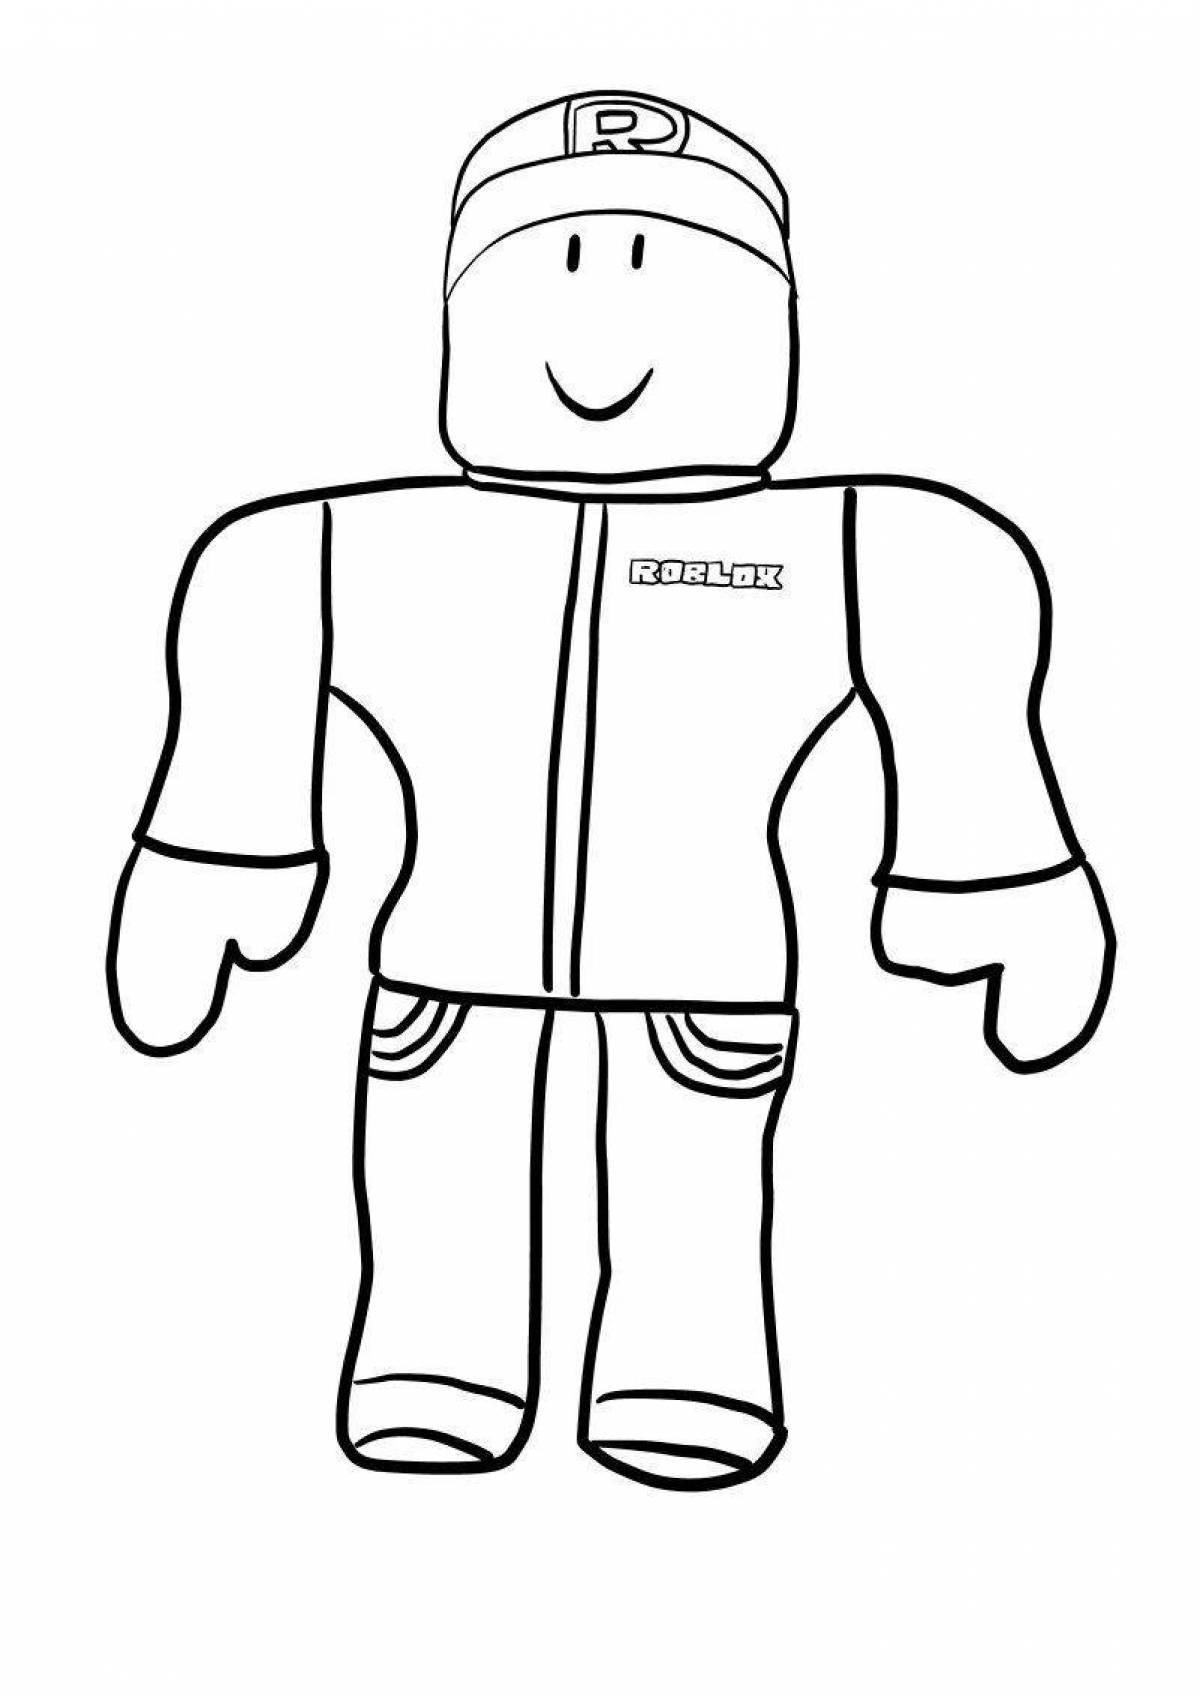 Playful roblox player coloring page